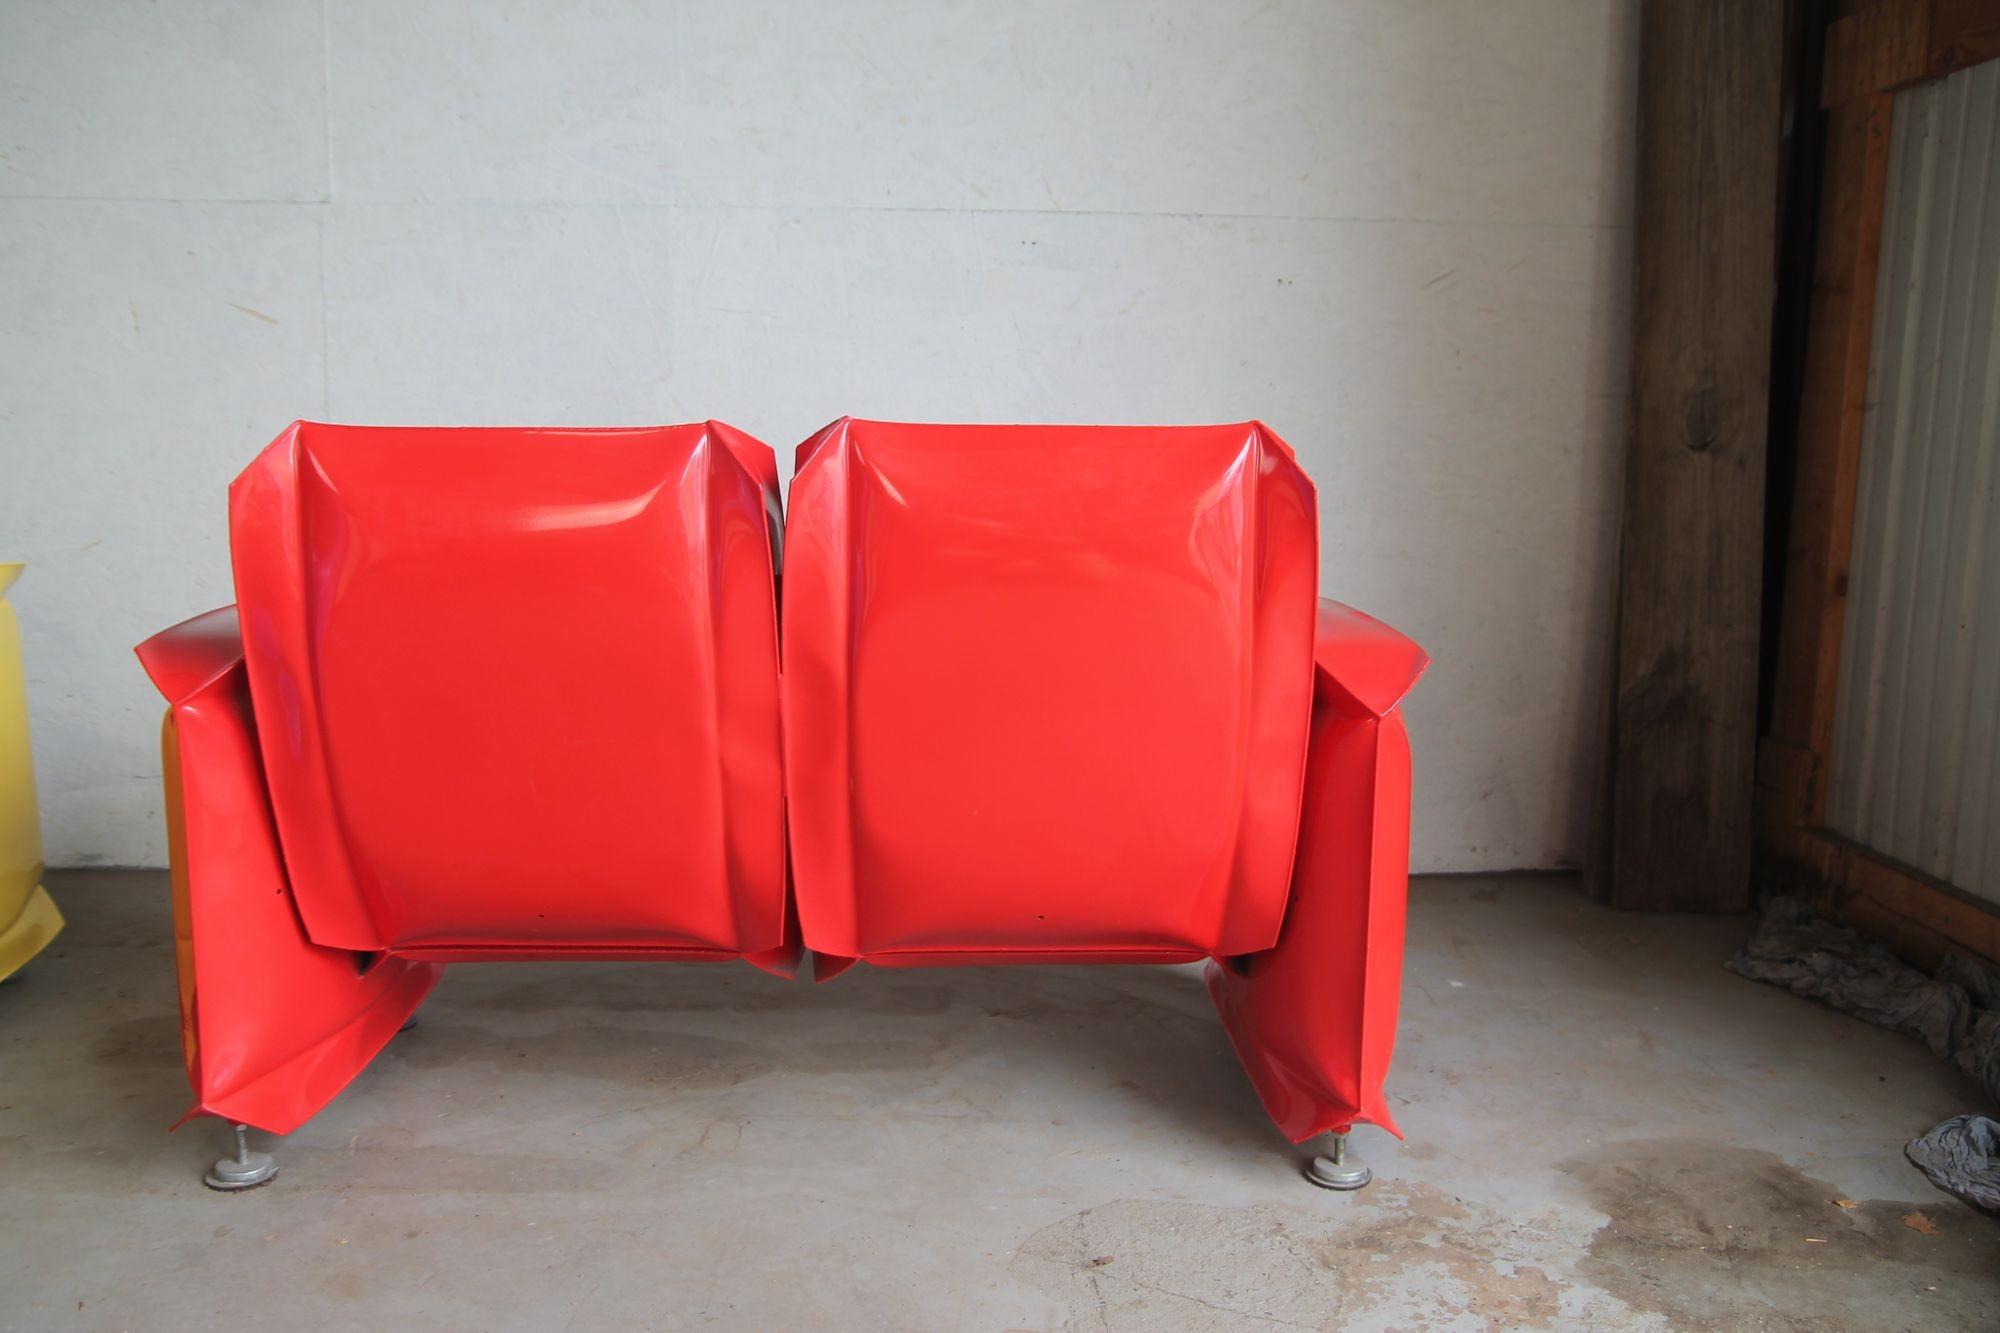 Inflated Steel Furniture Set by Robert Anderson For Sale 3